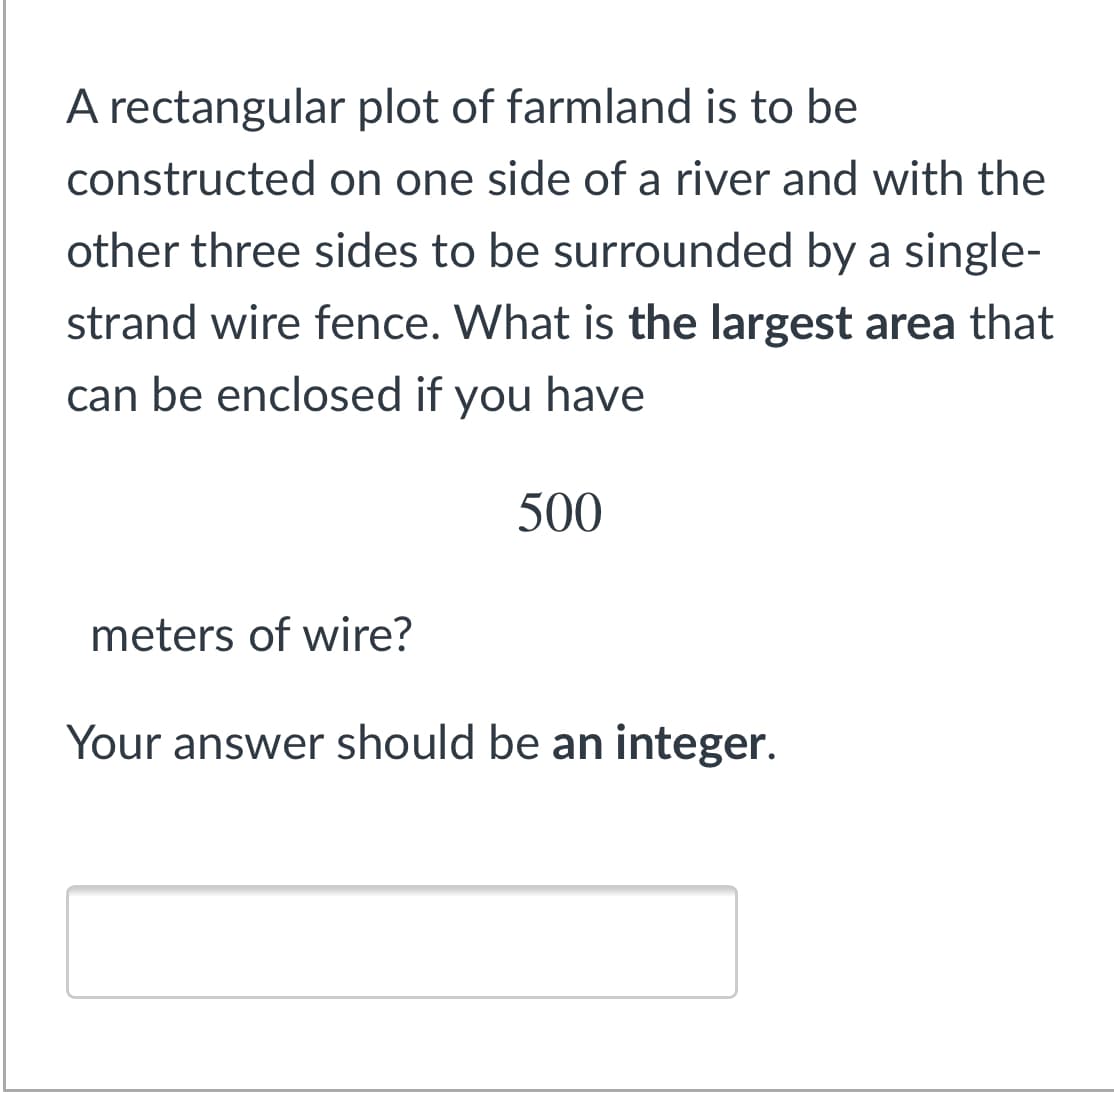 A rectangular plot of farmland is to be
constructed on one side of a river and with the
other three sides to be surrounded by a single-
strand wire fence. What is the largest area that
can be enclosed if you have
500
meters of wire?
Your answer should be an integer.
